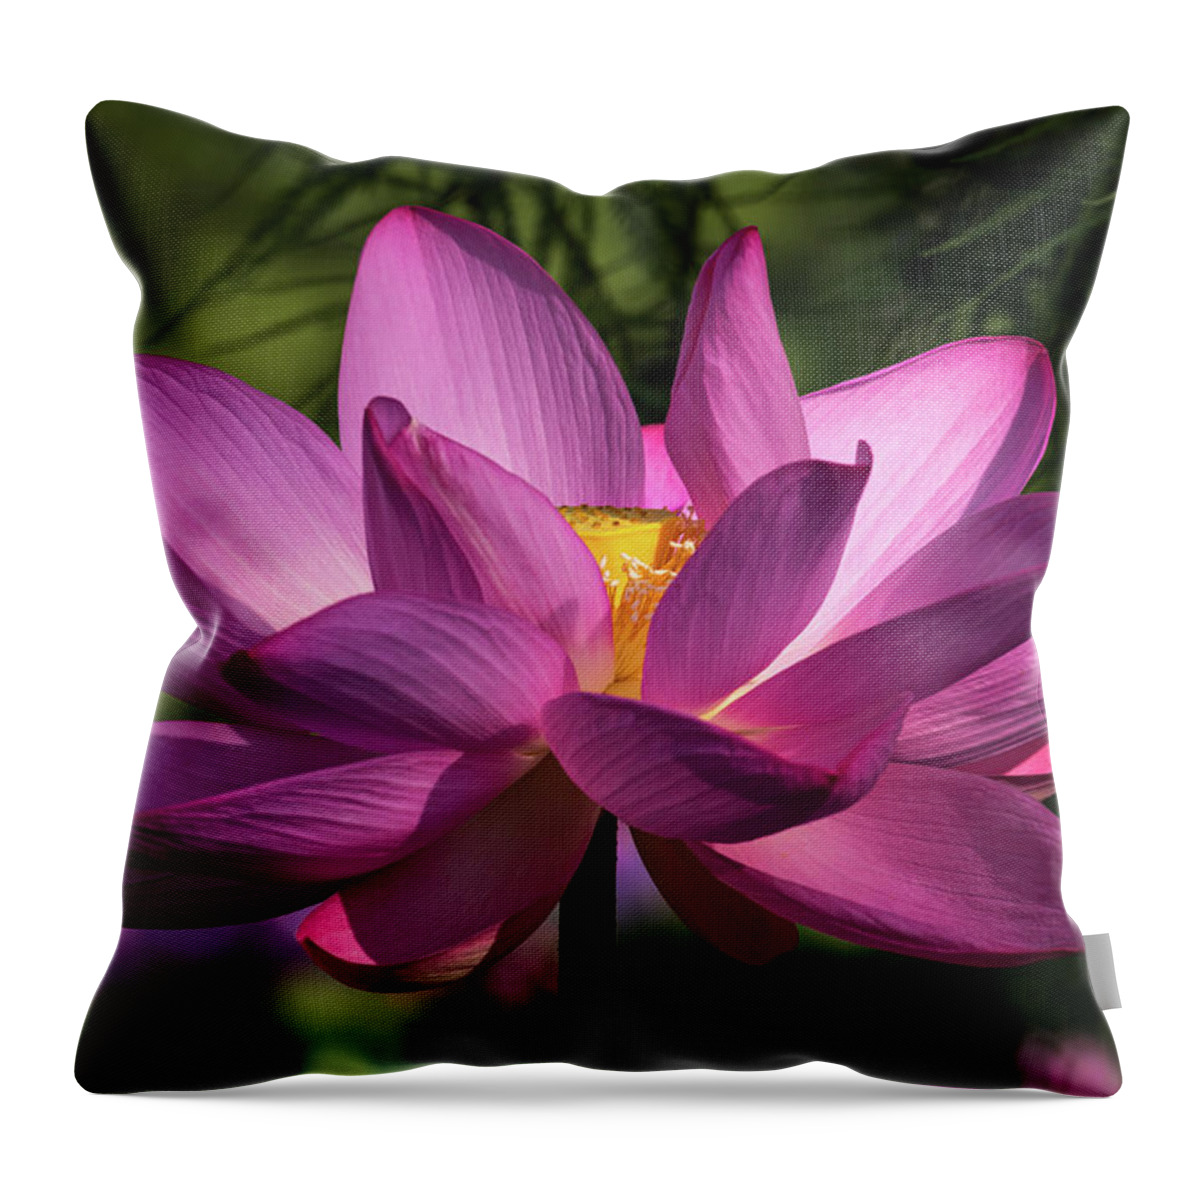 Photograph Throw Pillow featuring the photograph Be Like the Lotus by Cindy Lark Hartman